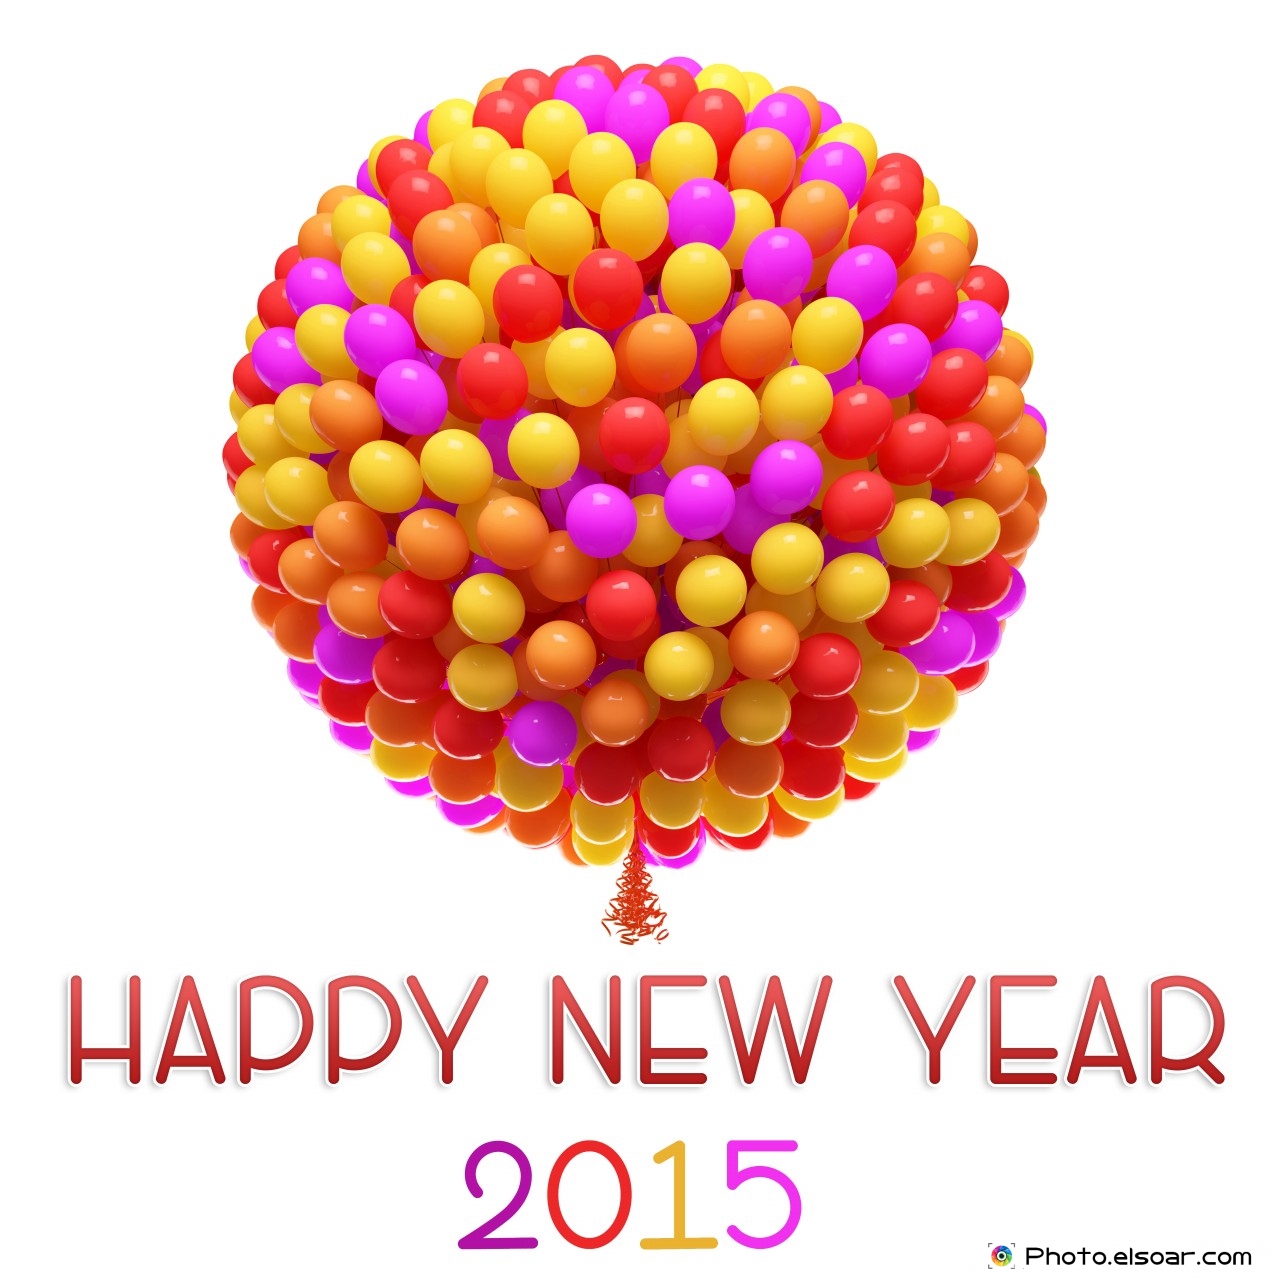 Happy New Year 2015 Big Bunch Of Balloons - 2020 New Year Greeting Card - HD Wallpaper 